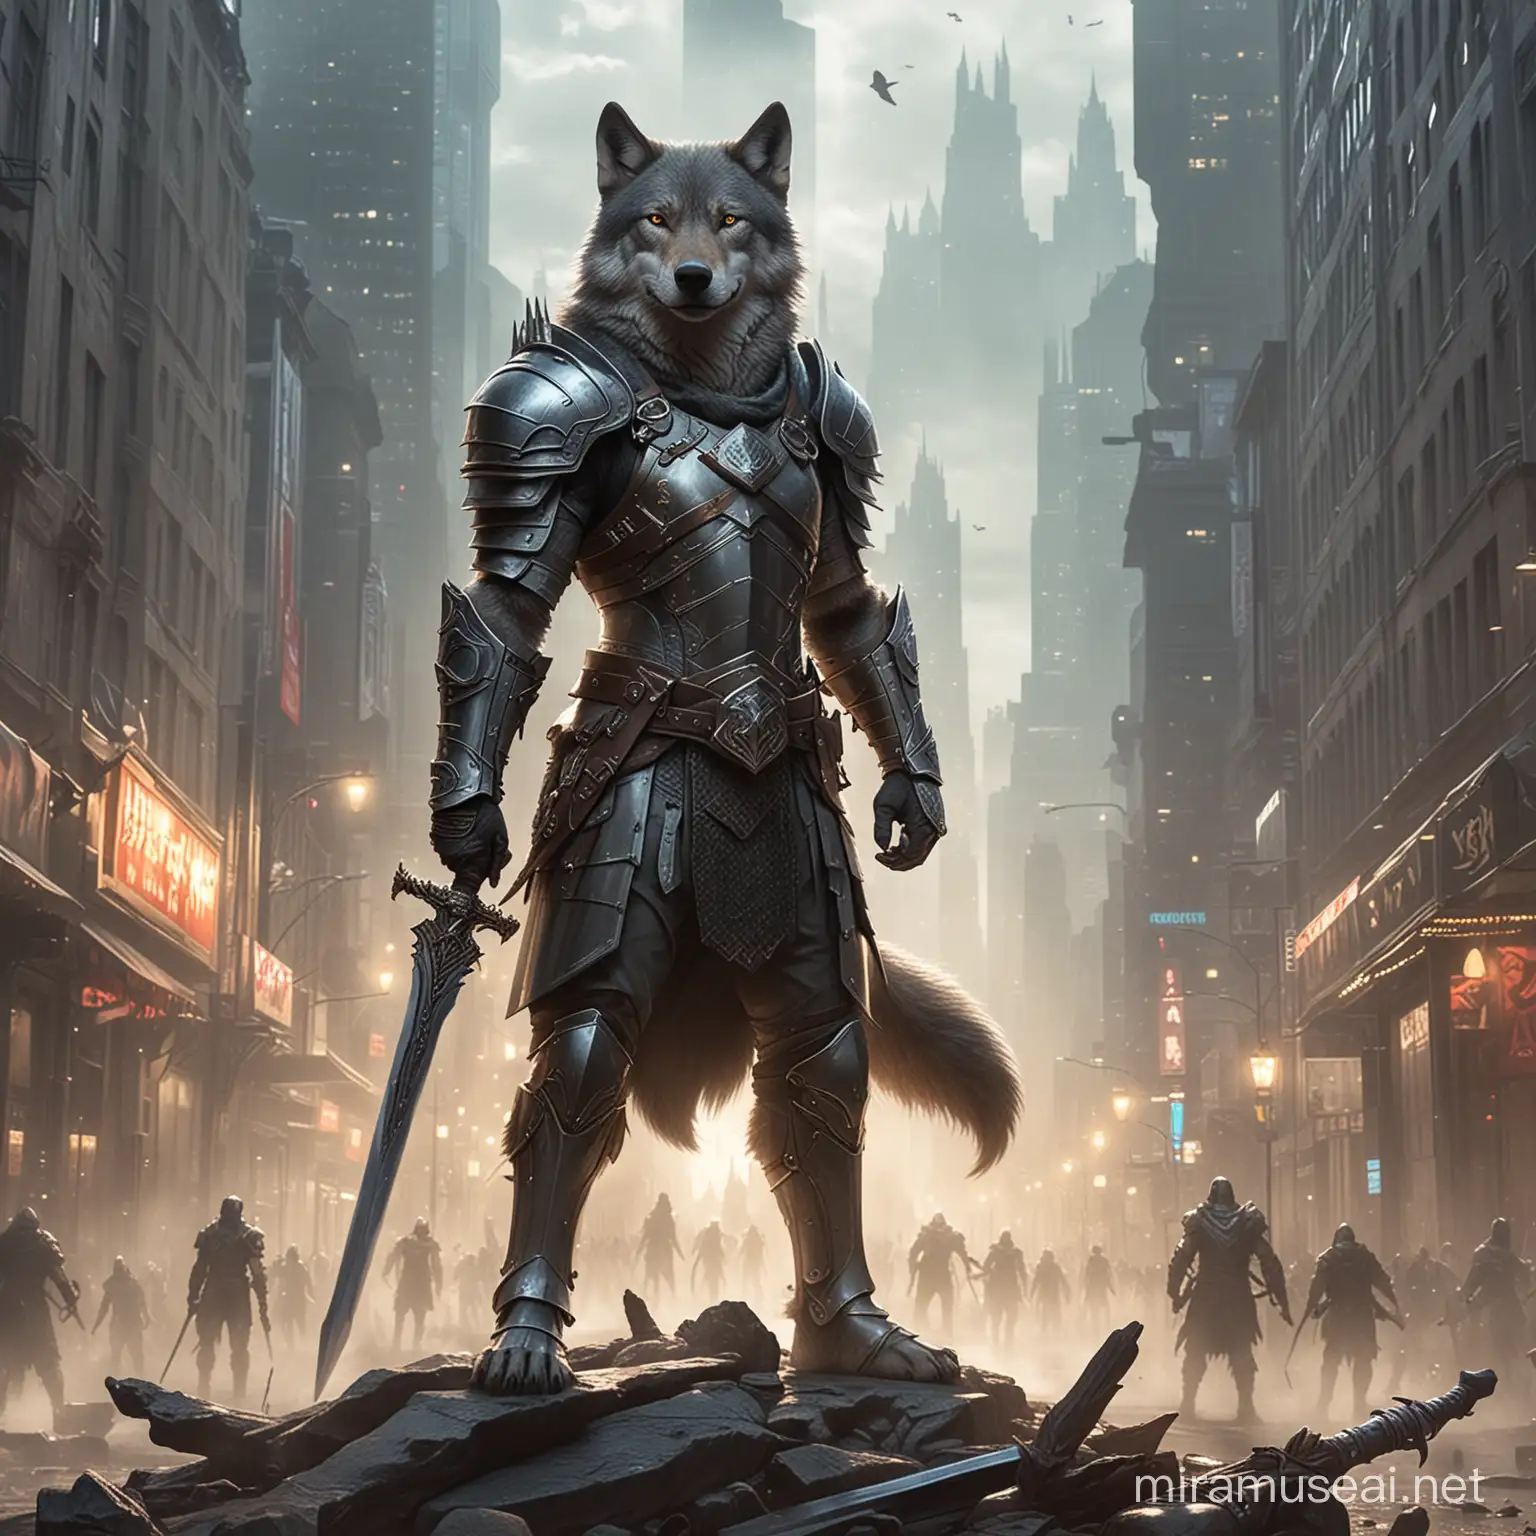 Armored Wolf Warrior with Magical Sword Dominates Urban Landscape